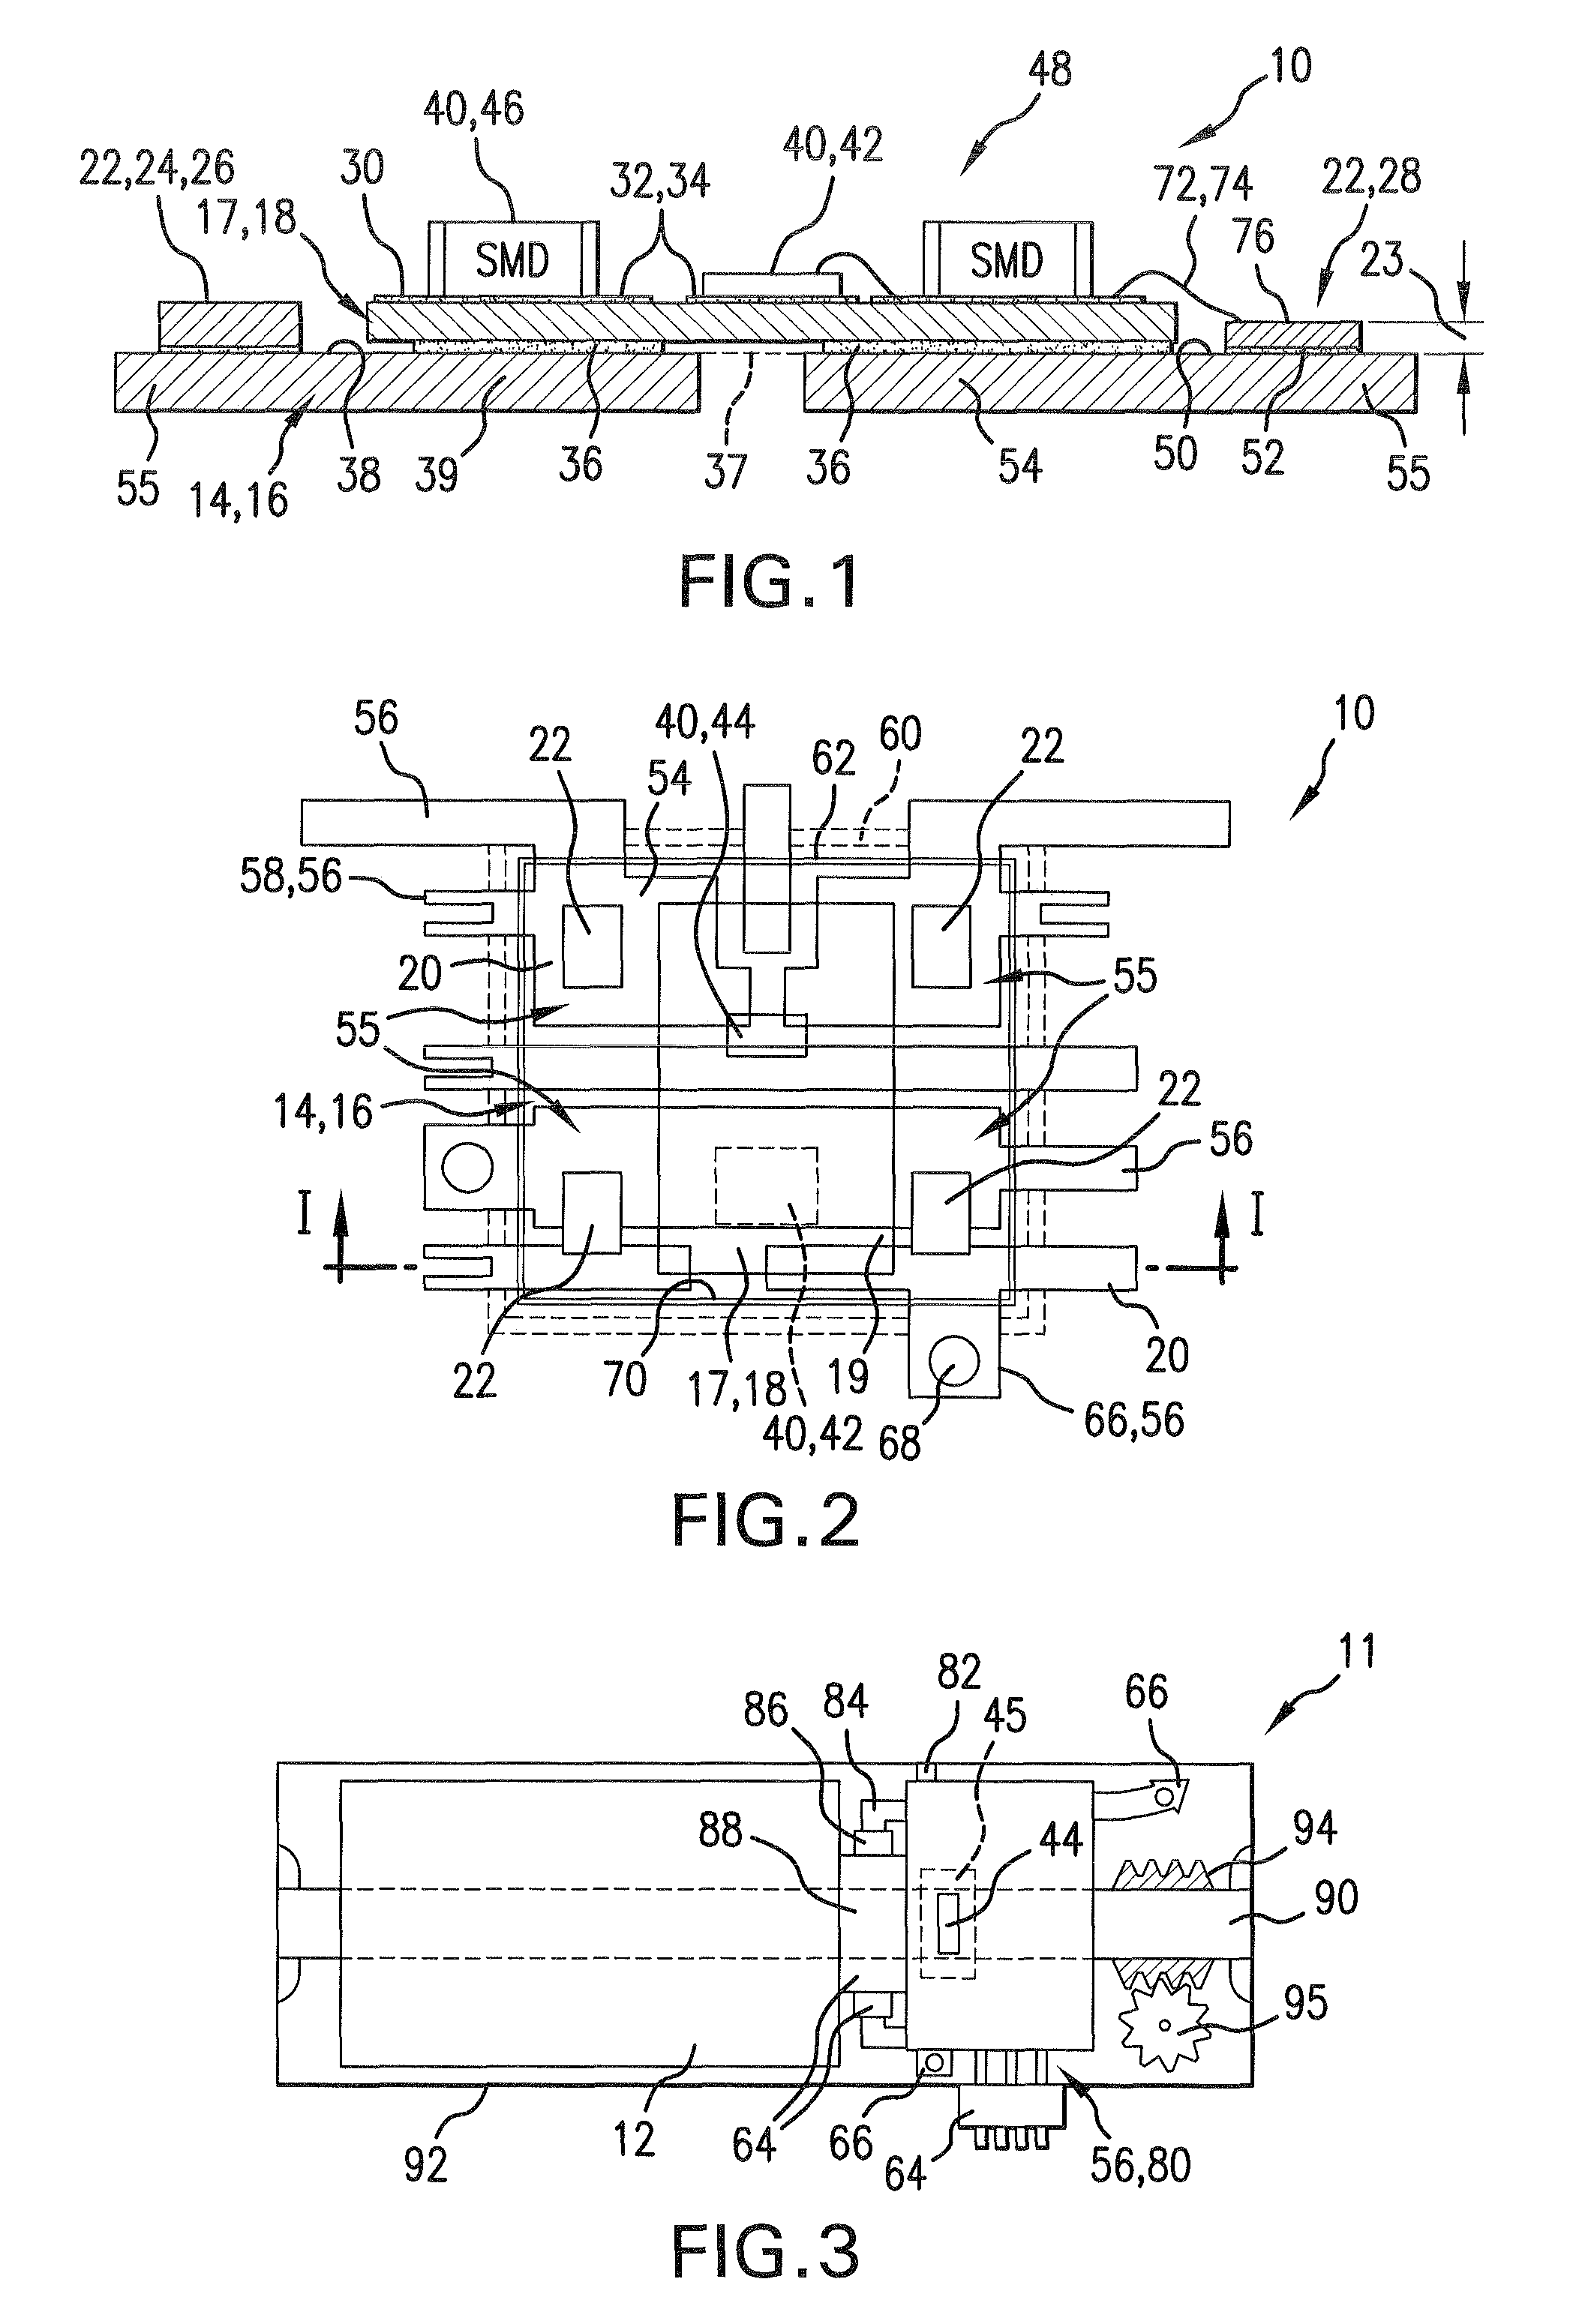 Electronic module and method for producing such a module